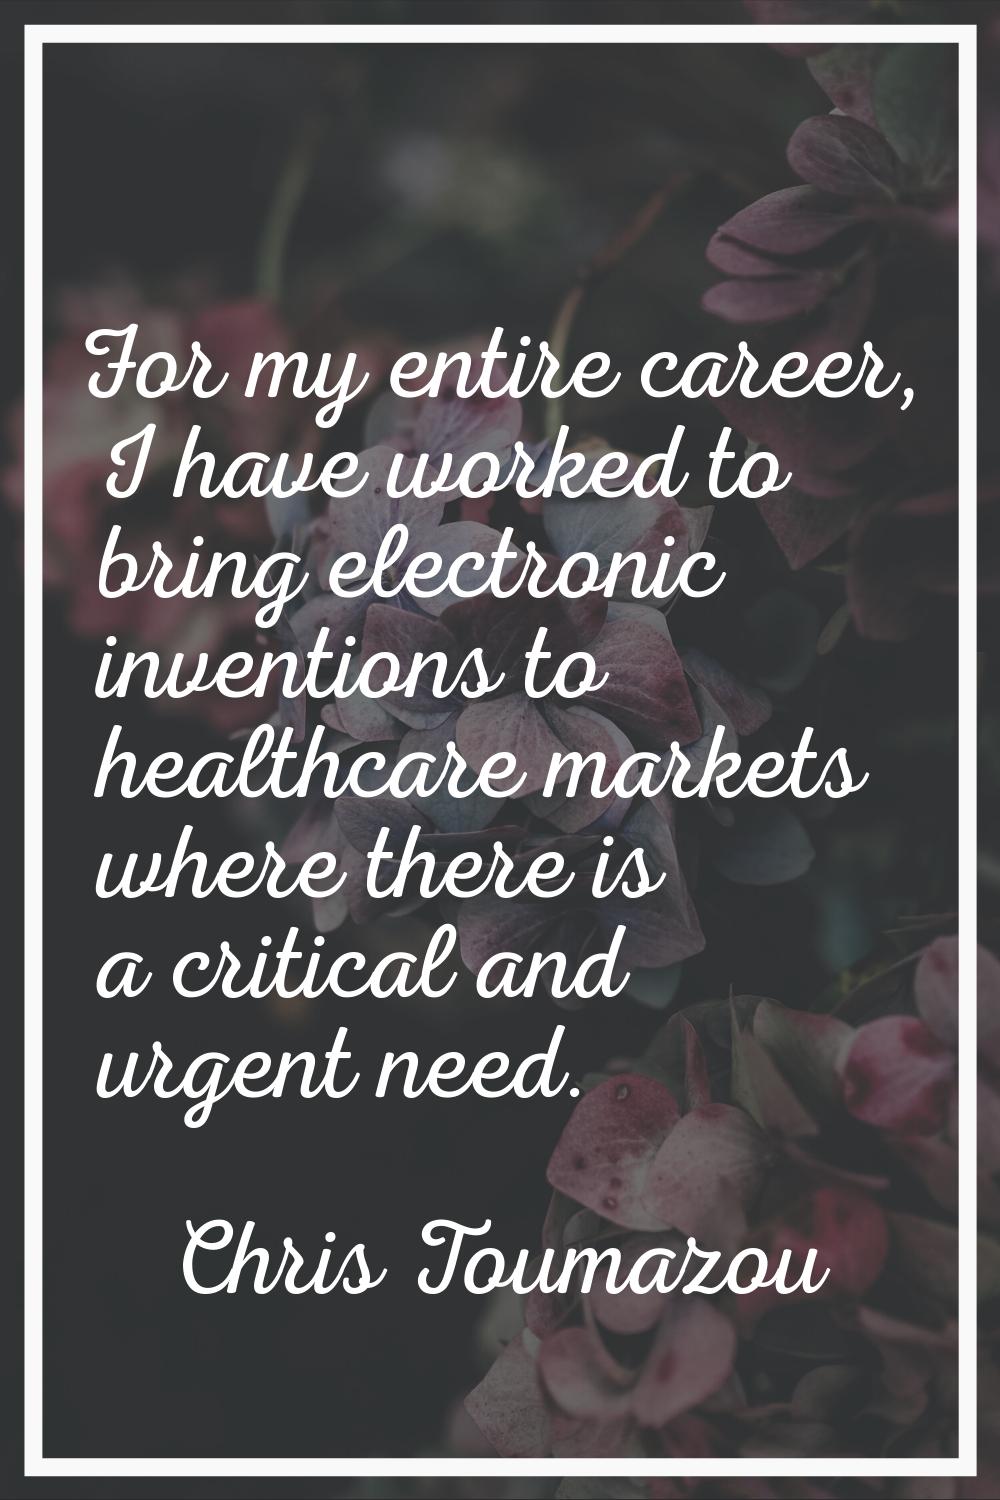 For my entire career, I have worked to bring electronic inventions to healthcare markets where ther